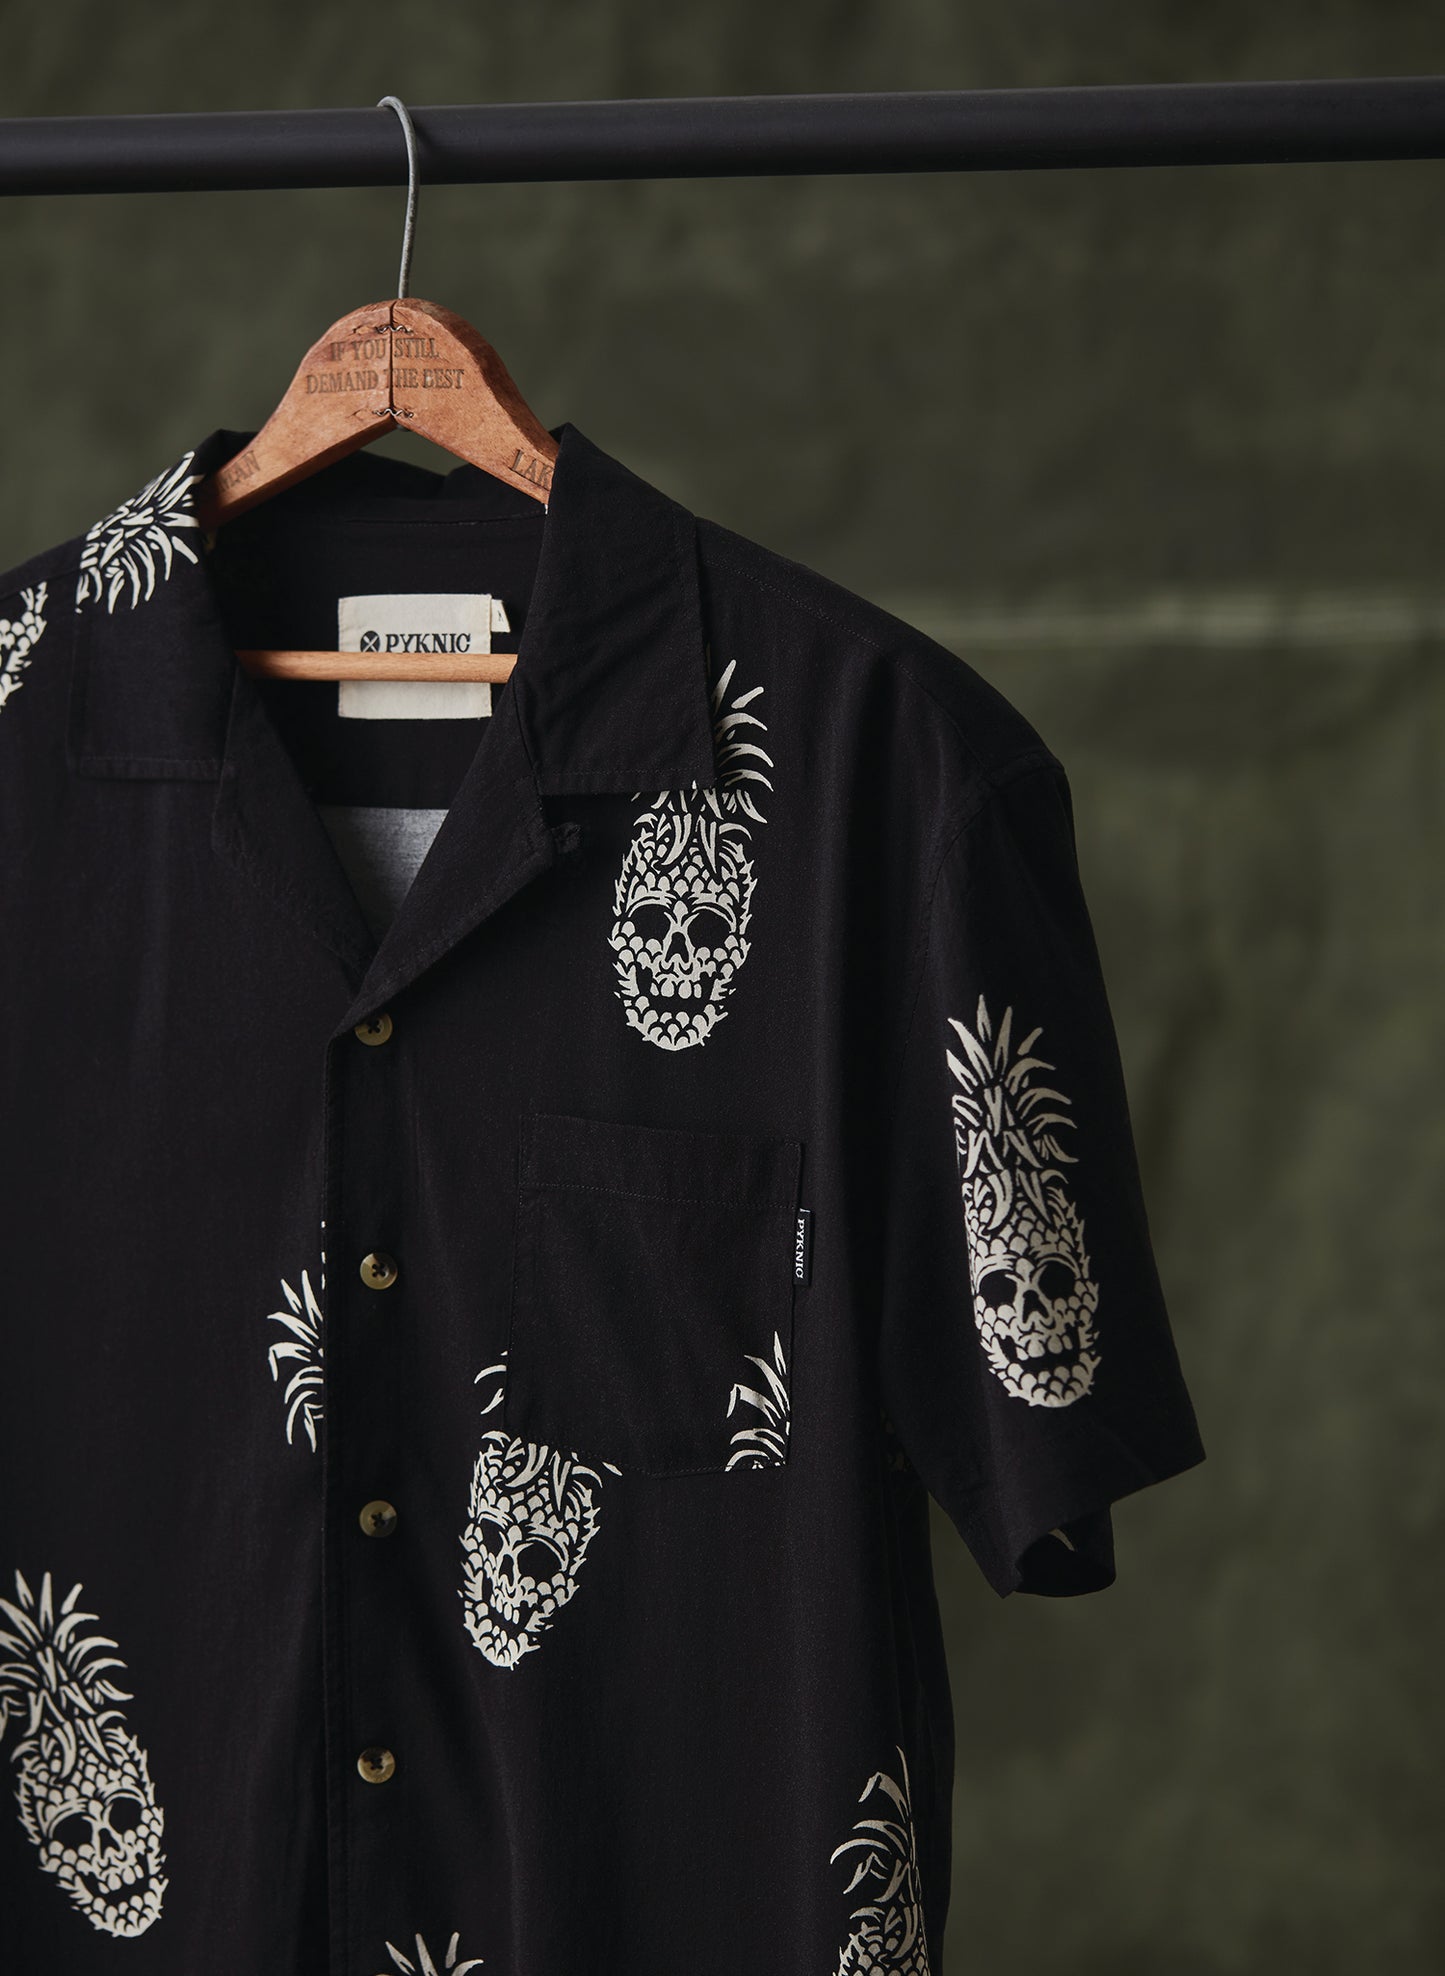 Pyknic | Permanent Vacation Casual Button-Up Shirt | Button Down Shirt with All Over Graphic Print, Tropical Pineapple Skull Tiki Shirt, Cool Food Shirt, Best Foodie Shirt, Best Foodie Gift, Food Themed Apparel, Food Tattoo Flash, Pineapple Pattern Button Down Shirt, Cool Button Up Shirts, Alternative Lifestyle Brand, Motorcycle Lifestyle Brand, Skull Button Up Shirt, 